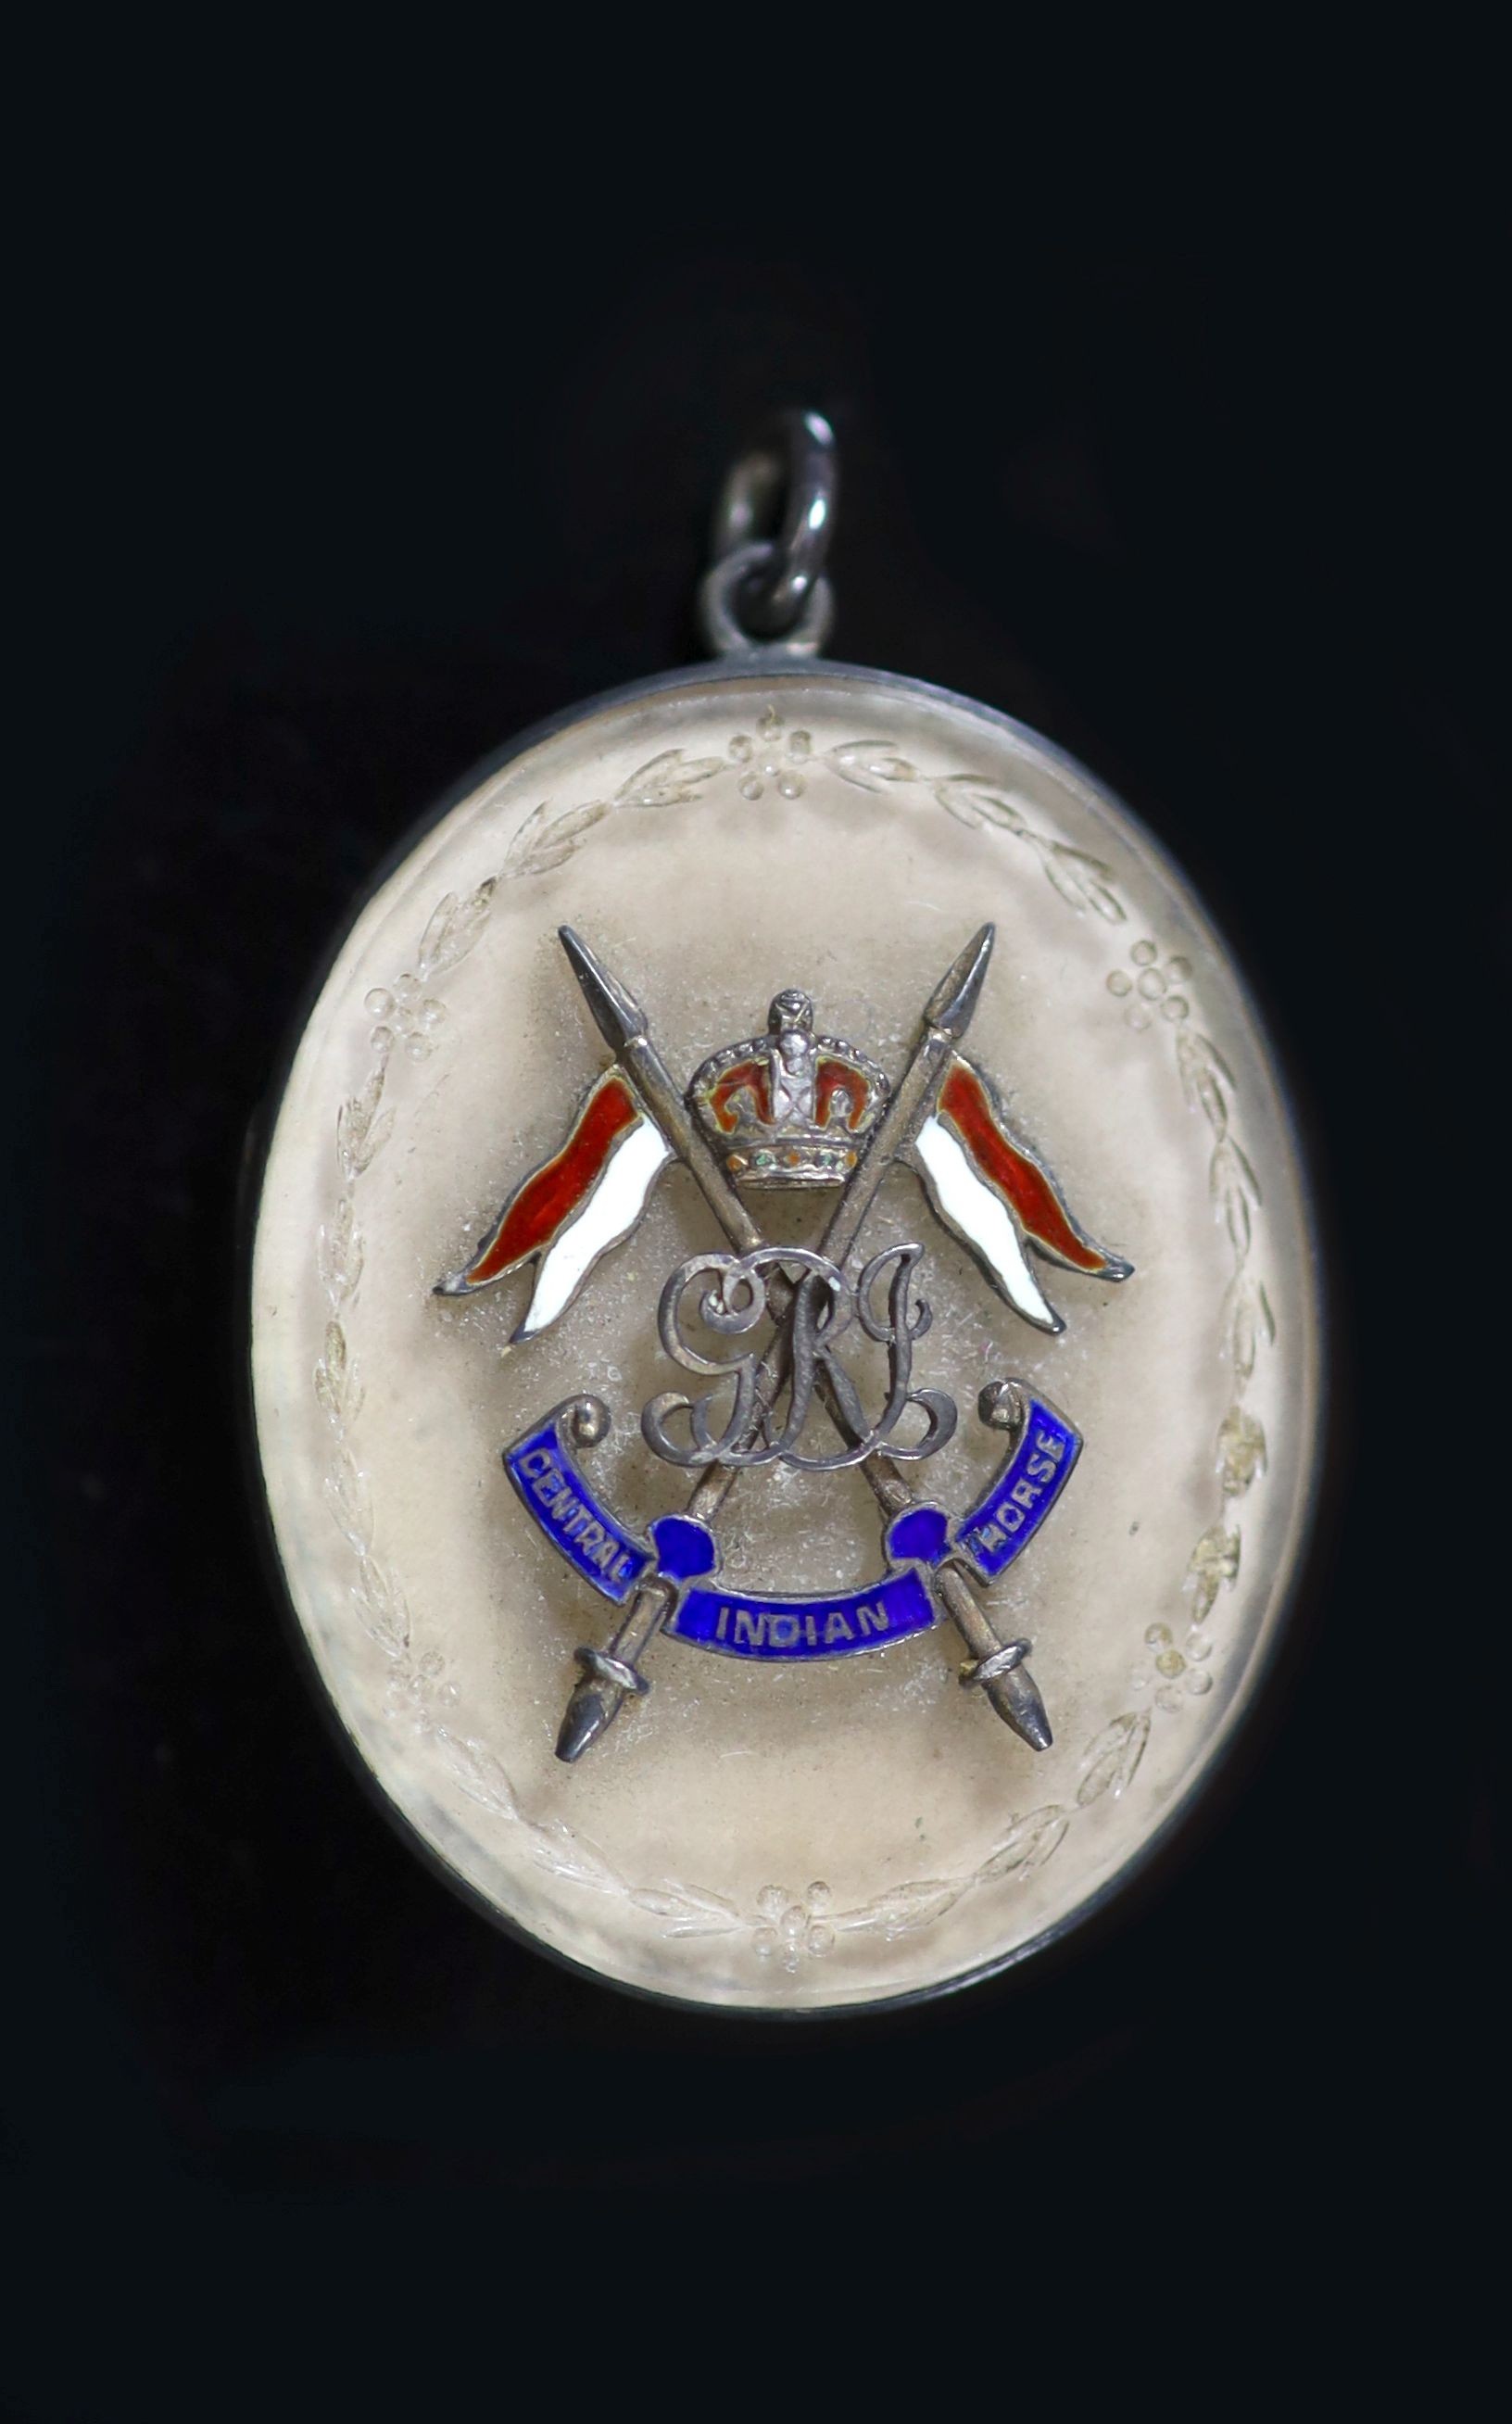 An early 20th century silver, rock crystal? and enamel set 'Central Indian Horse' cavalry regiment oval pendant locket